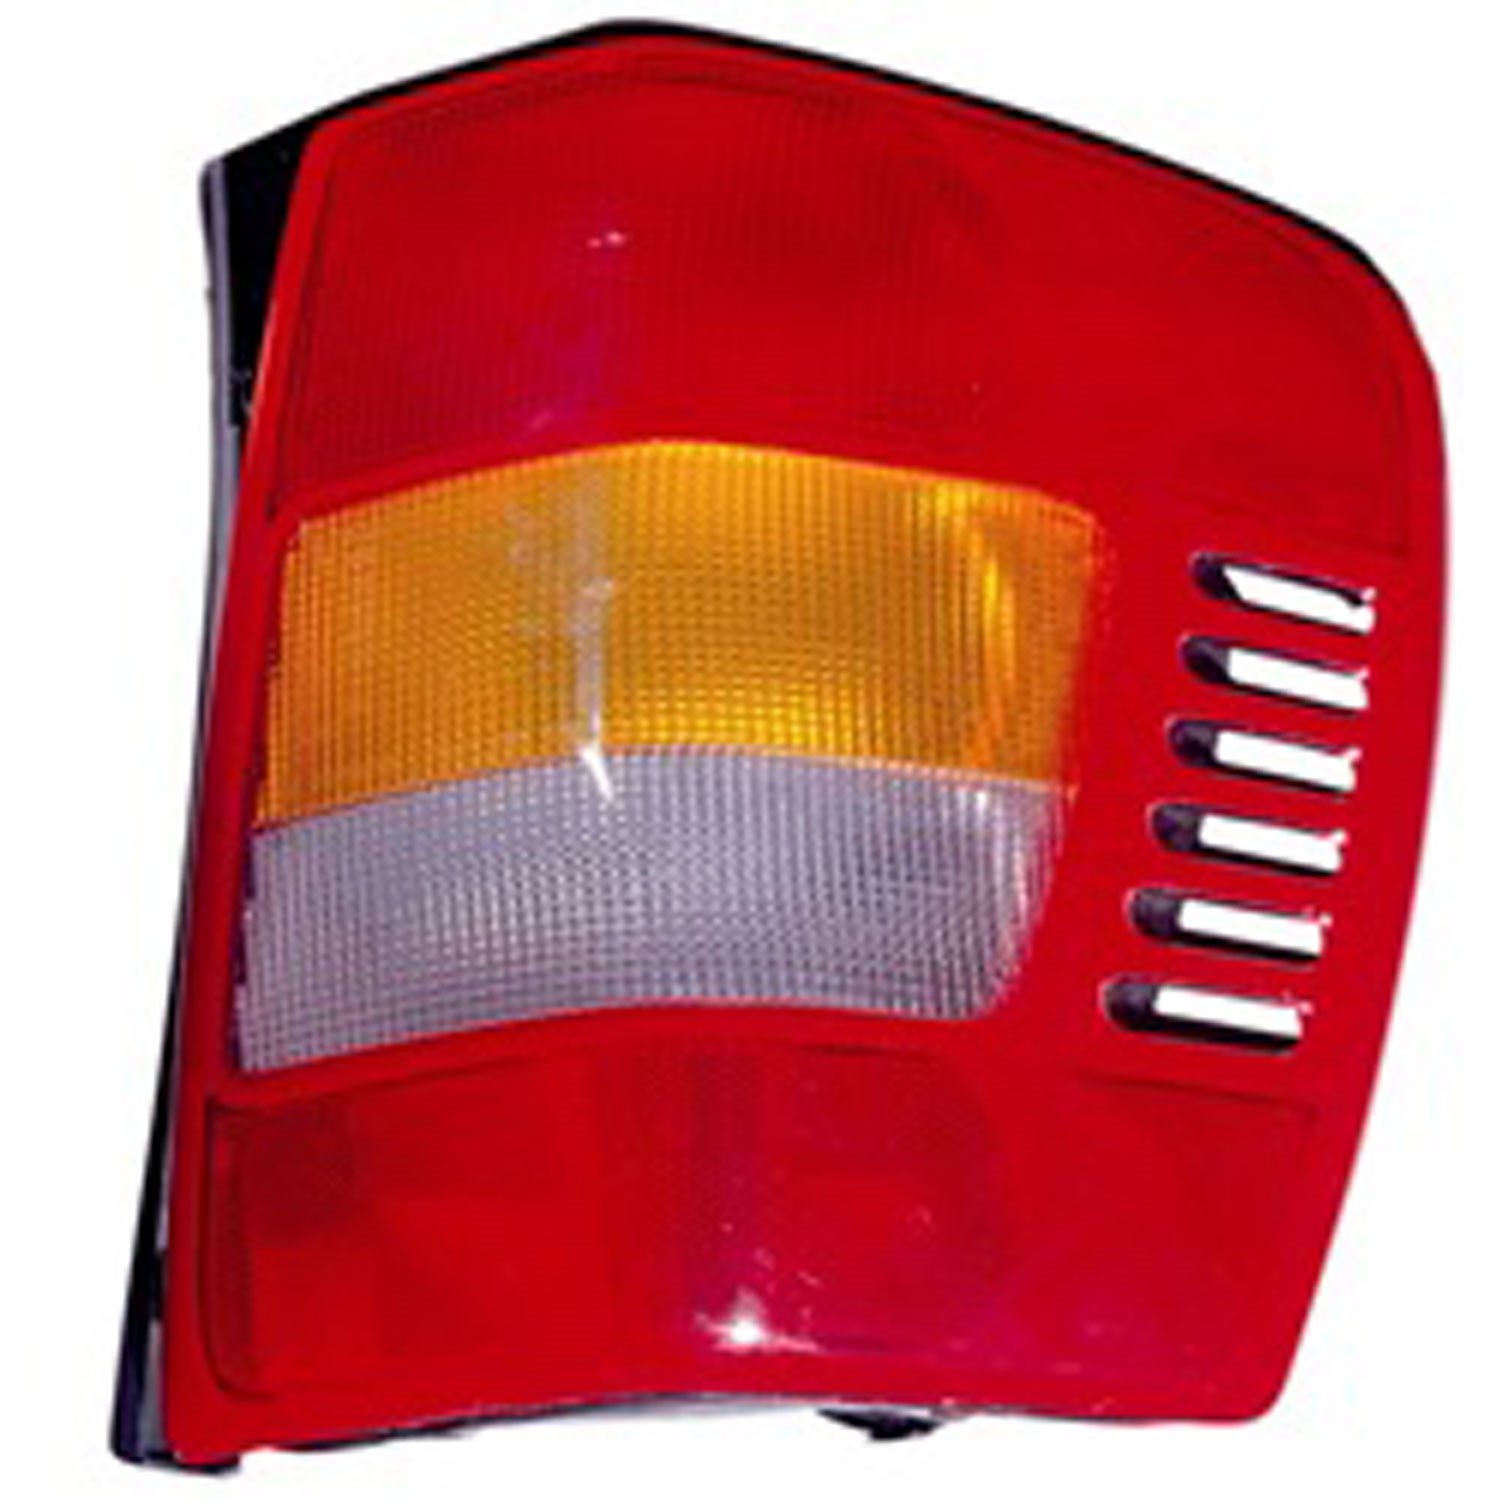 Replacement tail light assembly from Omix-ADA, Fits right side of 99-04 Jeep Grand Cherokee WJ